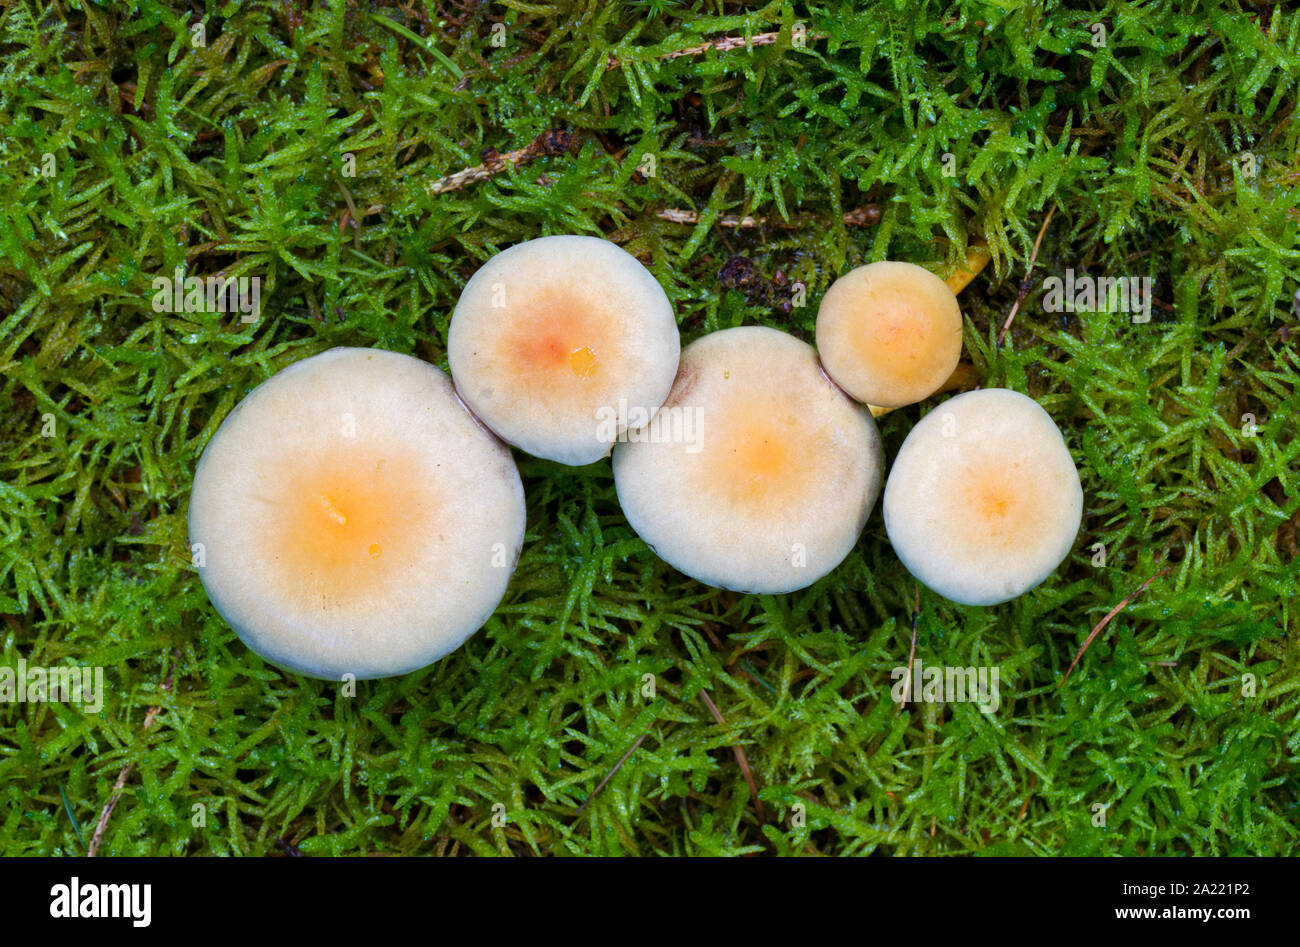 Five Sulphur tuft (Hypholoma fasciculare) mushrooms, poisonous toadstools, almost perfect circles in Hypnum moss (Hypnum cupressiforme) Stock Photo